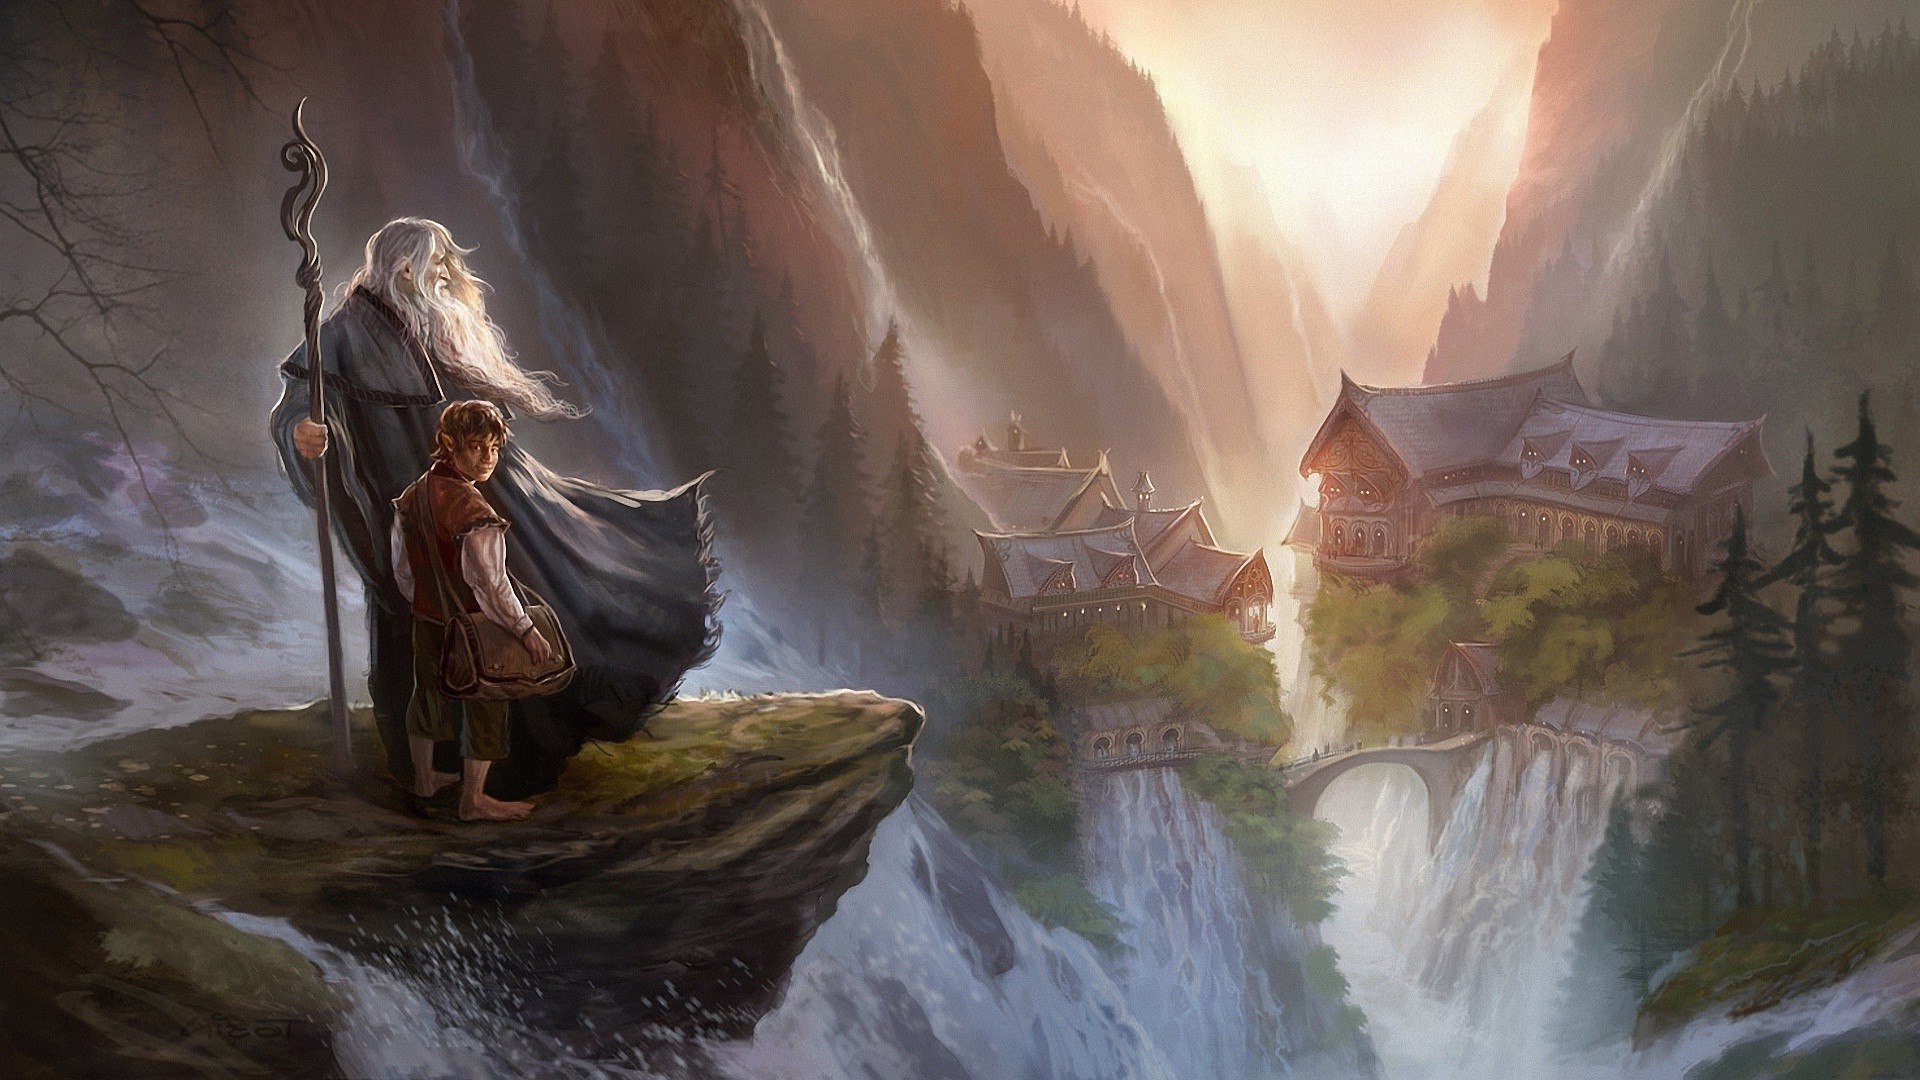 the-lord-of-the-rings-gandalf-the-hobbit-imladris-rivendell